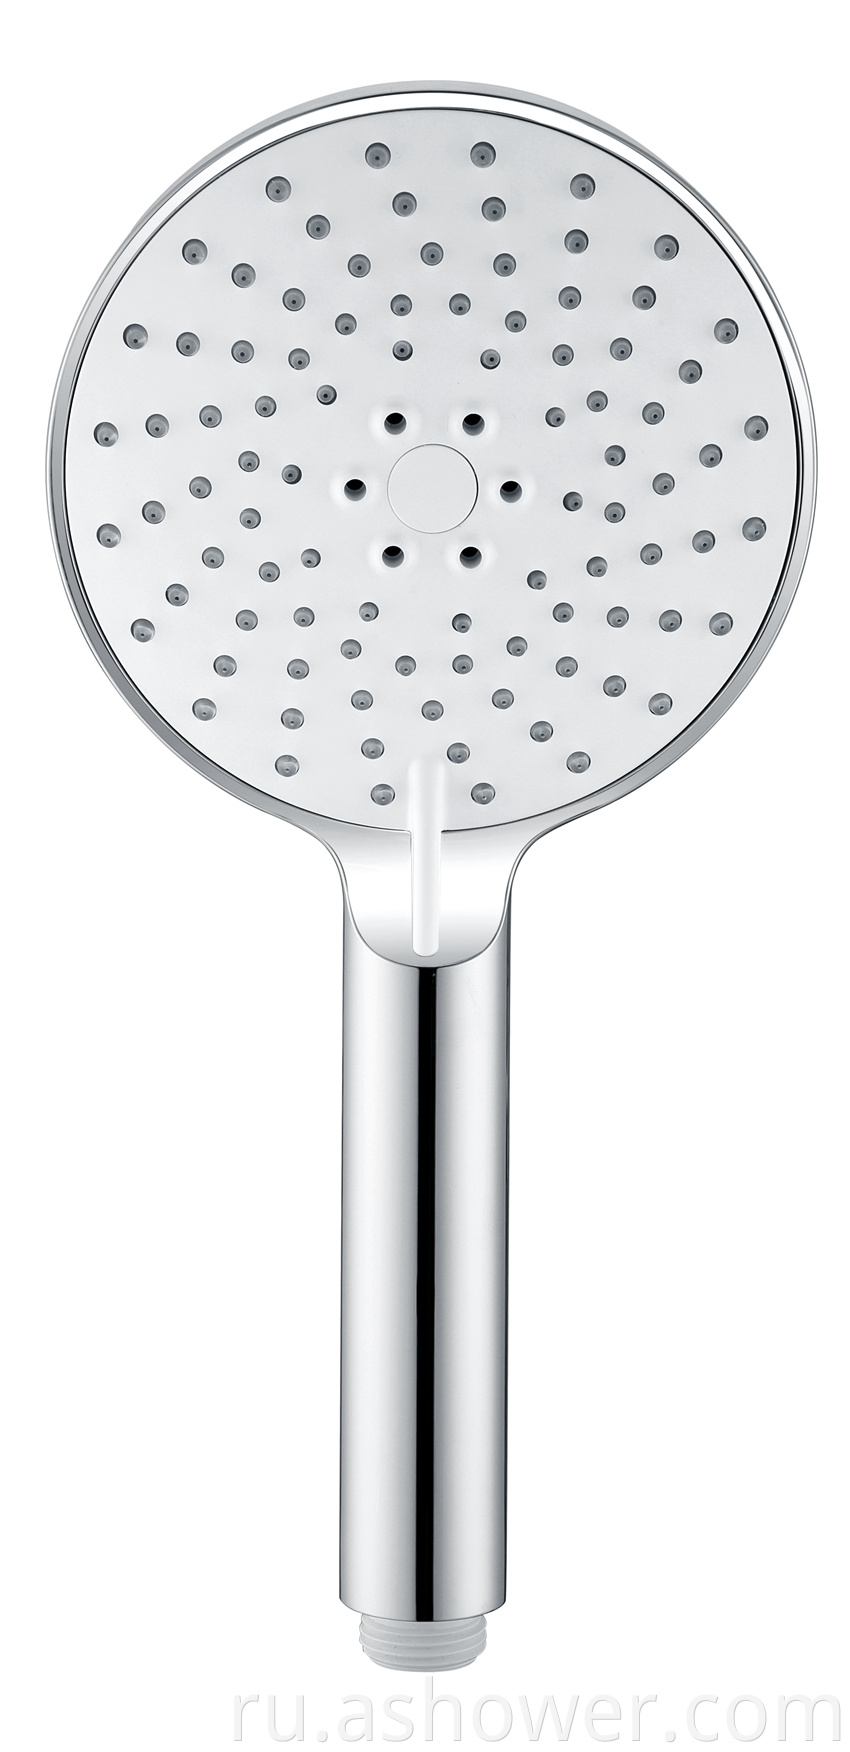 Three Functions Of Hand Shower